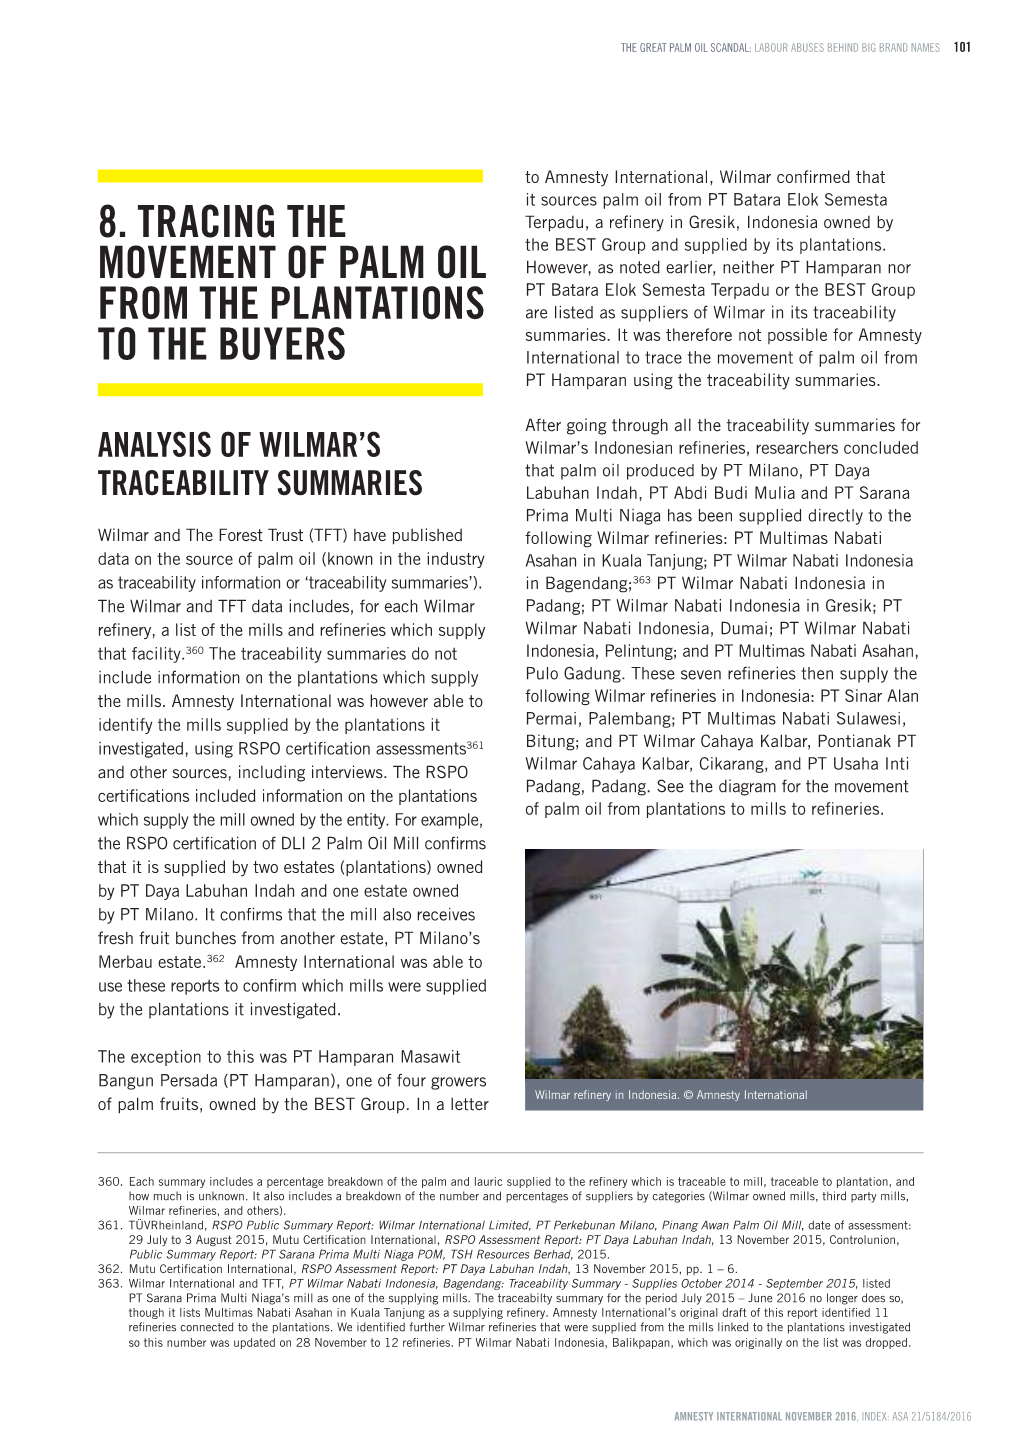 8. Tracing the Movement of Palm Oil from The